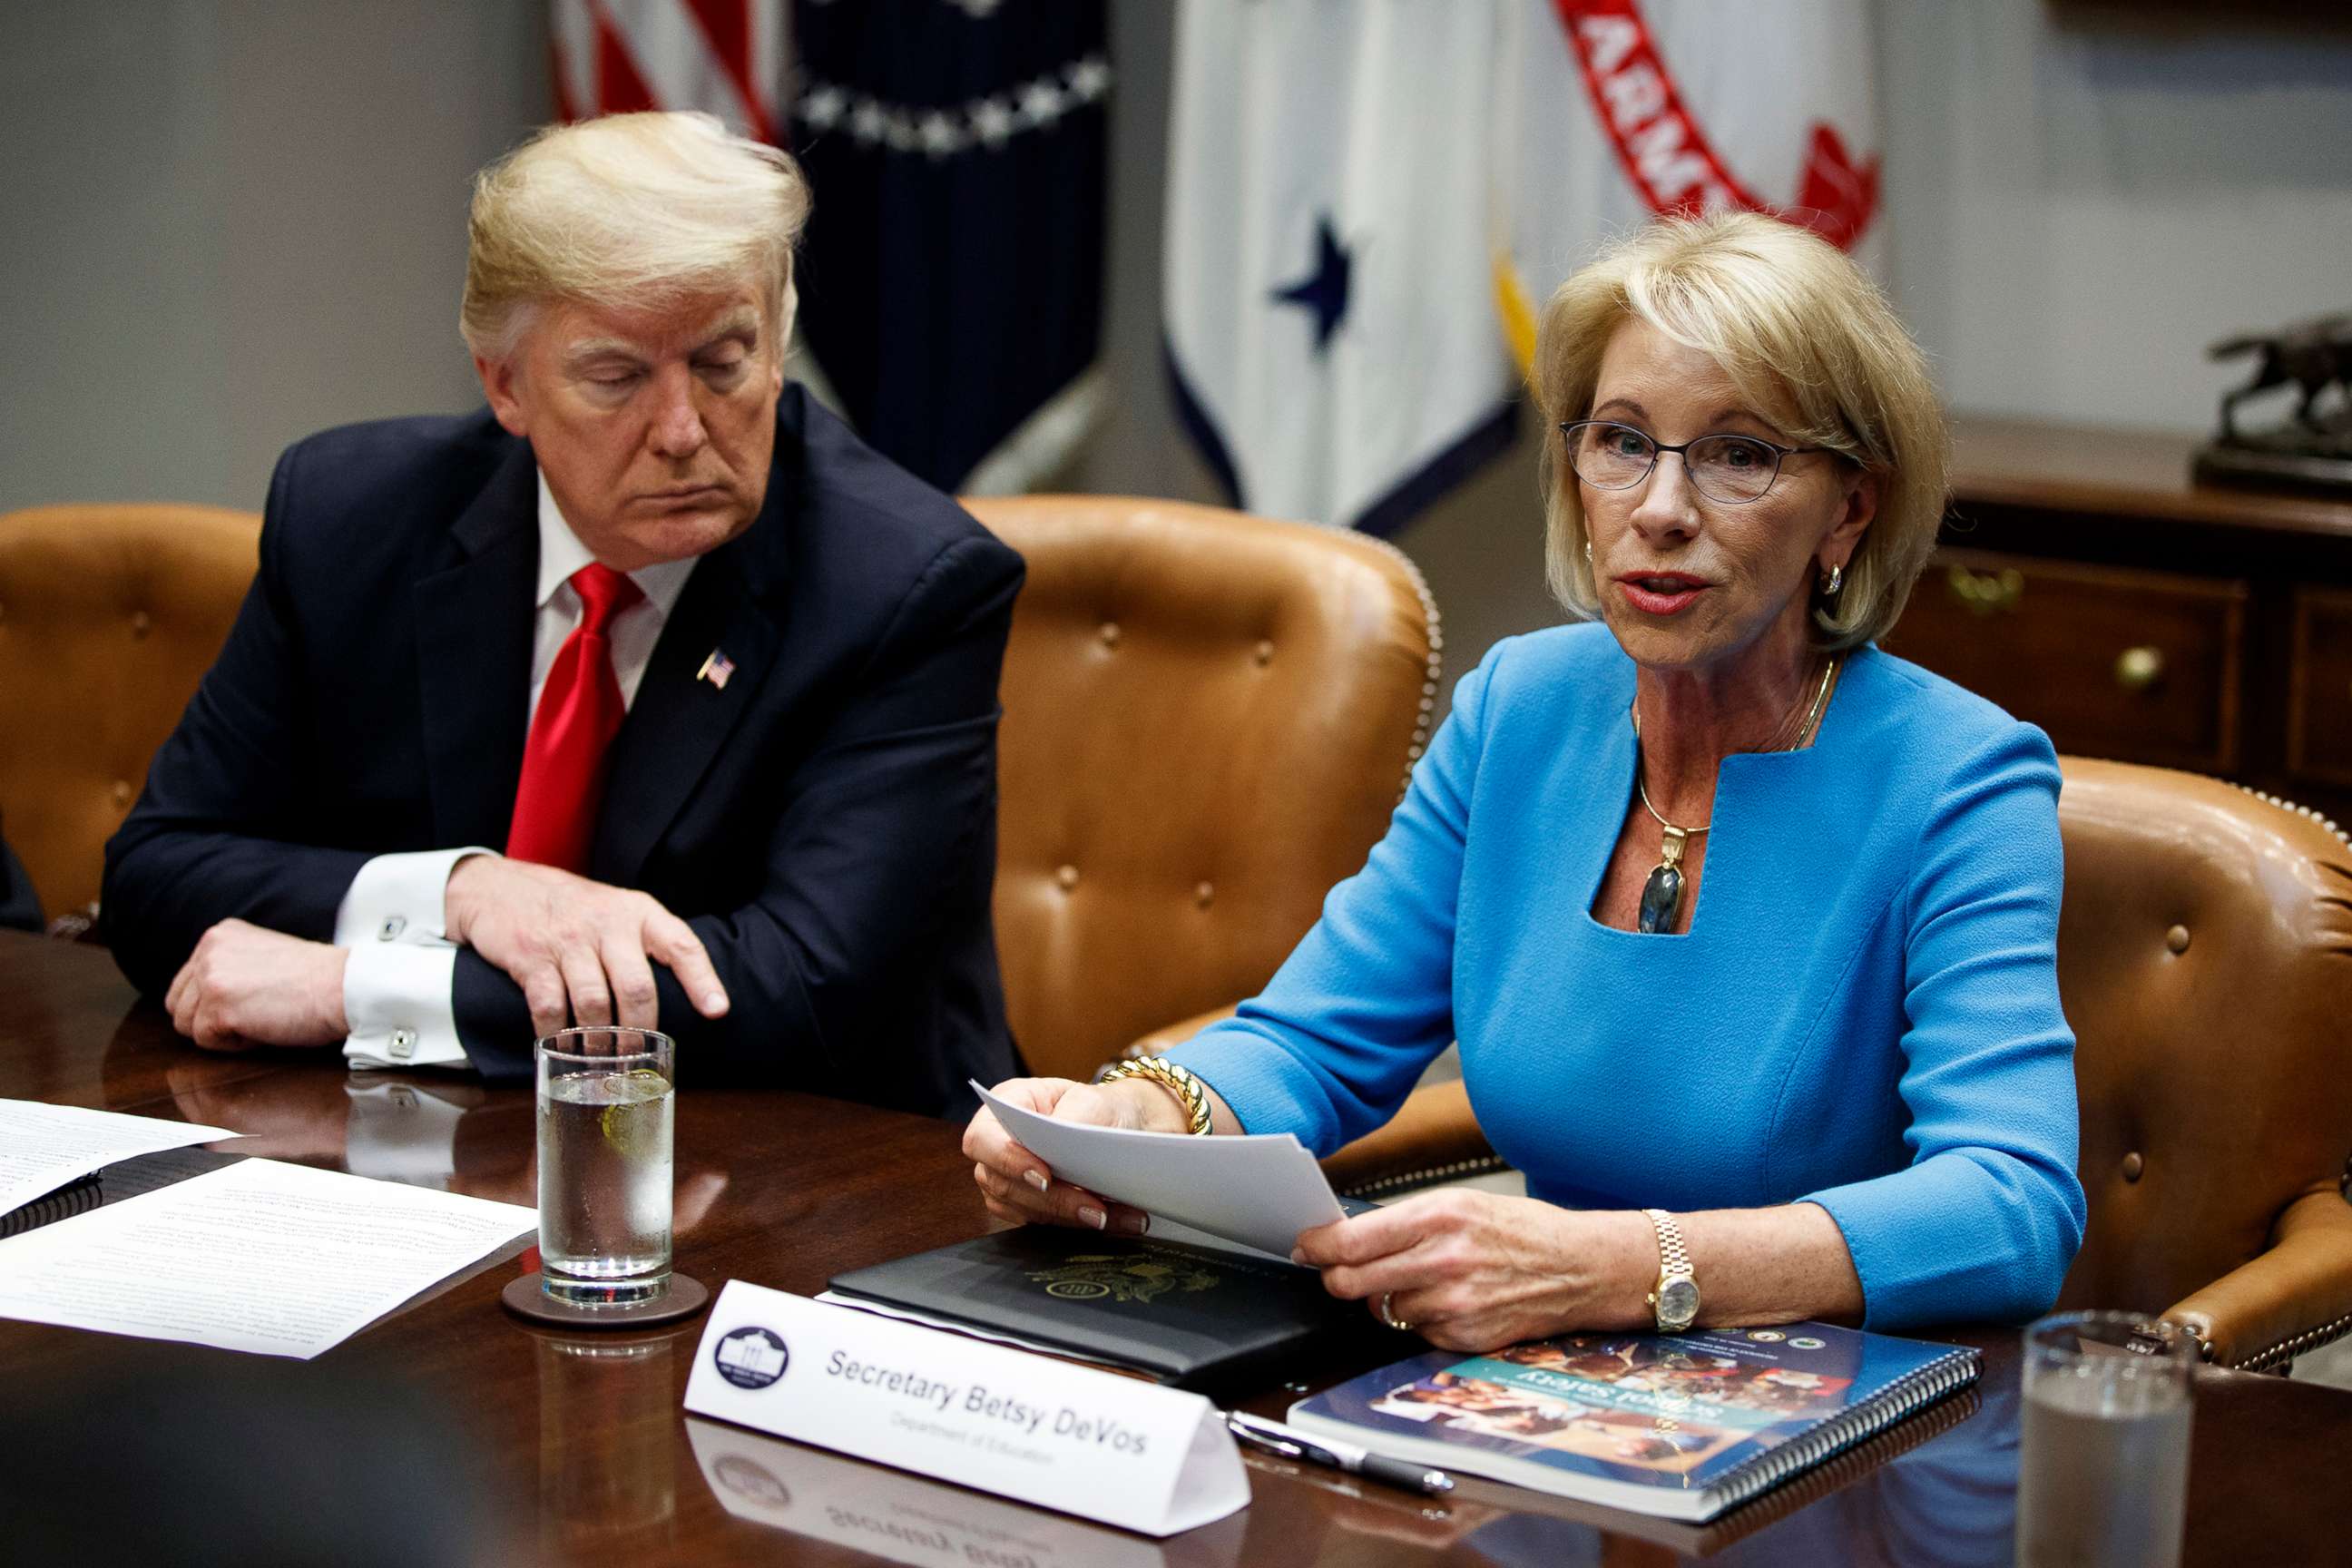 PHOTO: In this Dec. 18, 2018, file photo, President Donald Trump listens as Secretary of Education Betsy DeVos speaks during a roundtable discussion on the Federal Commission on School Safety report, in the Roosevelt Room of the White House in Washington.